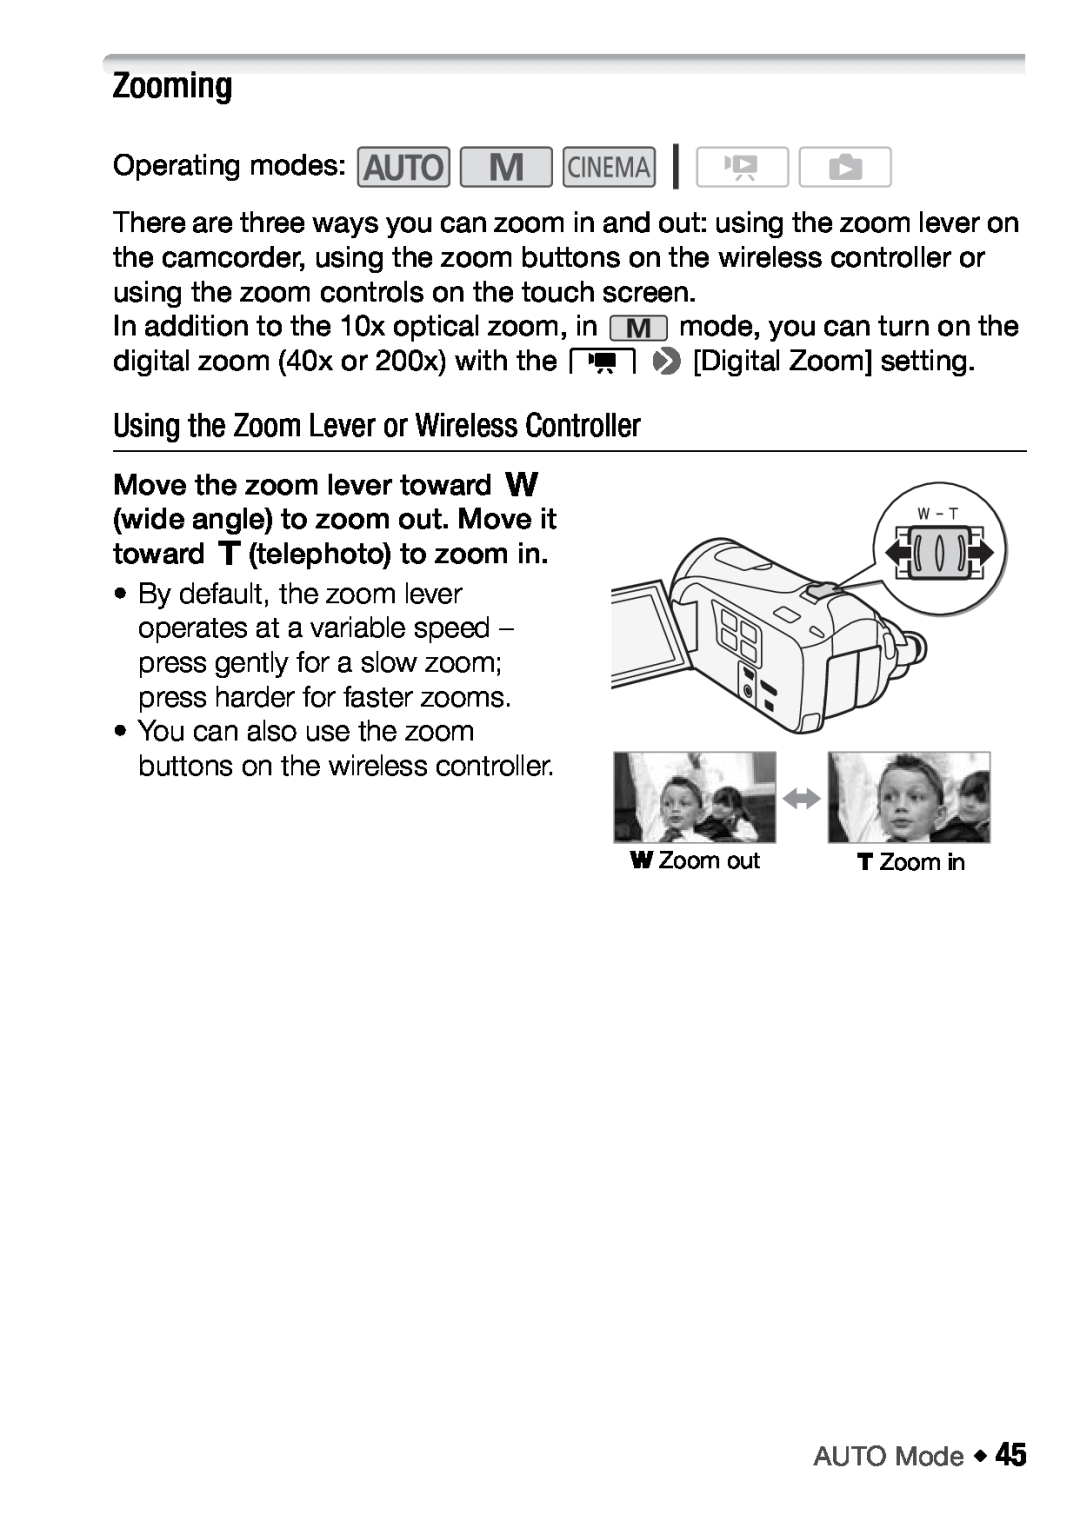 Canon HFM46, HFM406 instruction manual Zooming, Using the Zoom Lever or Wireless Controller 